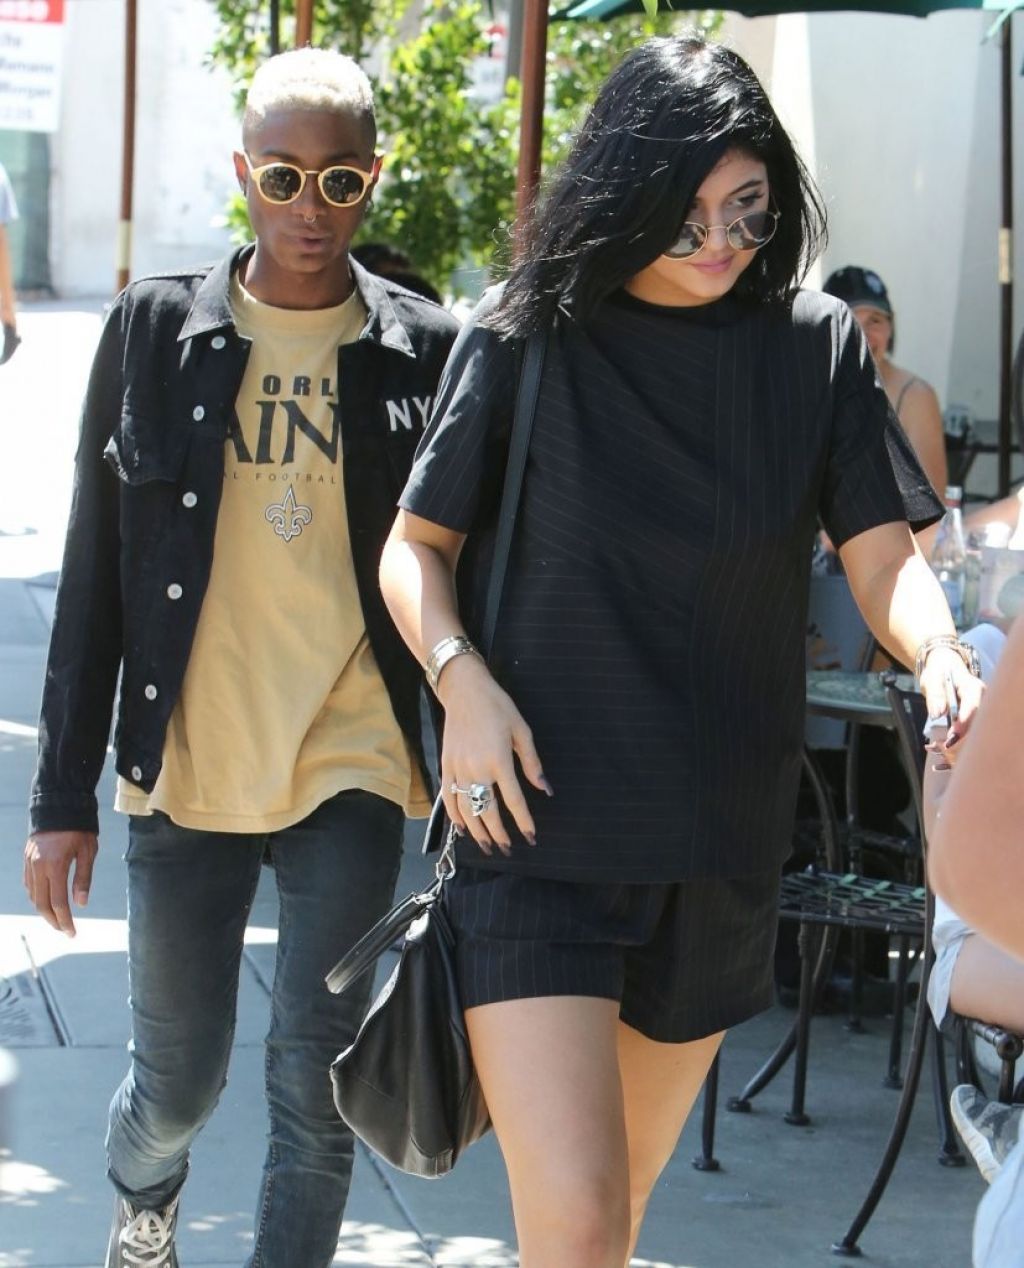 Kylie Jenner Los Angeles July 16, 2014 – Star Style